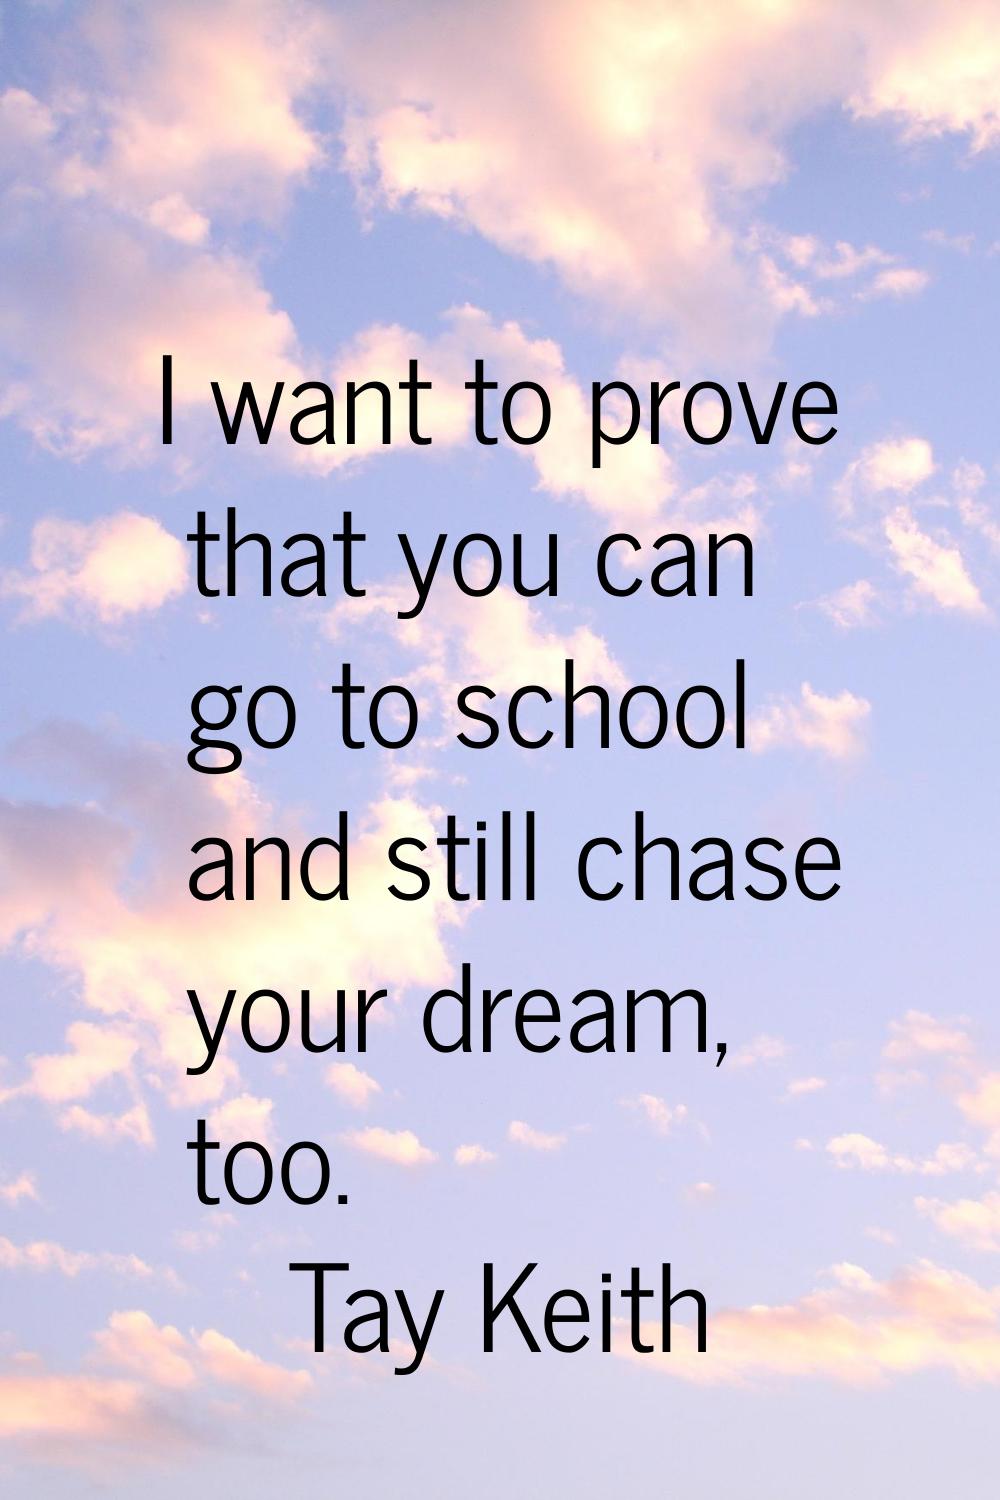 I want to prove that you can go to school and still chase your dream, too.